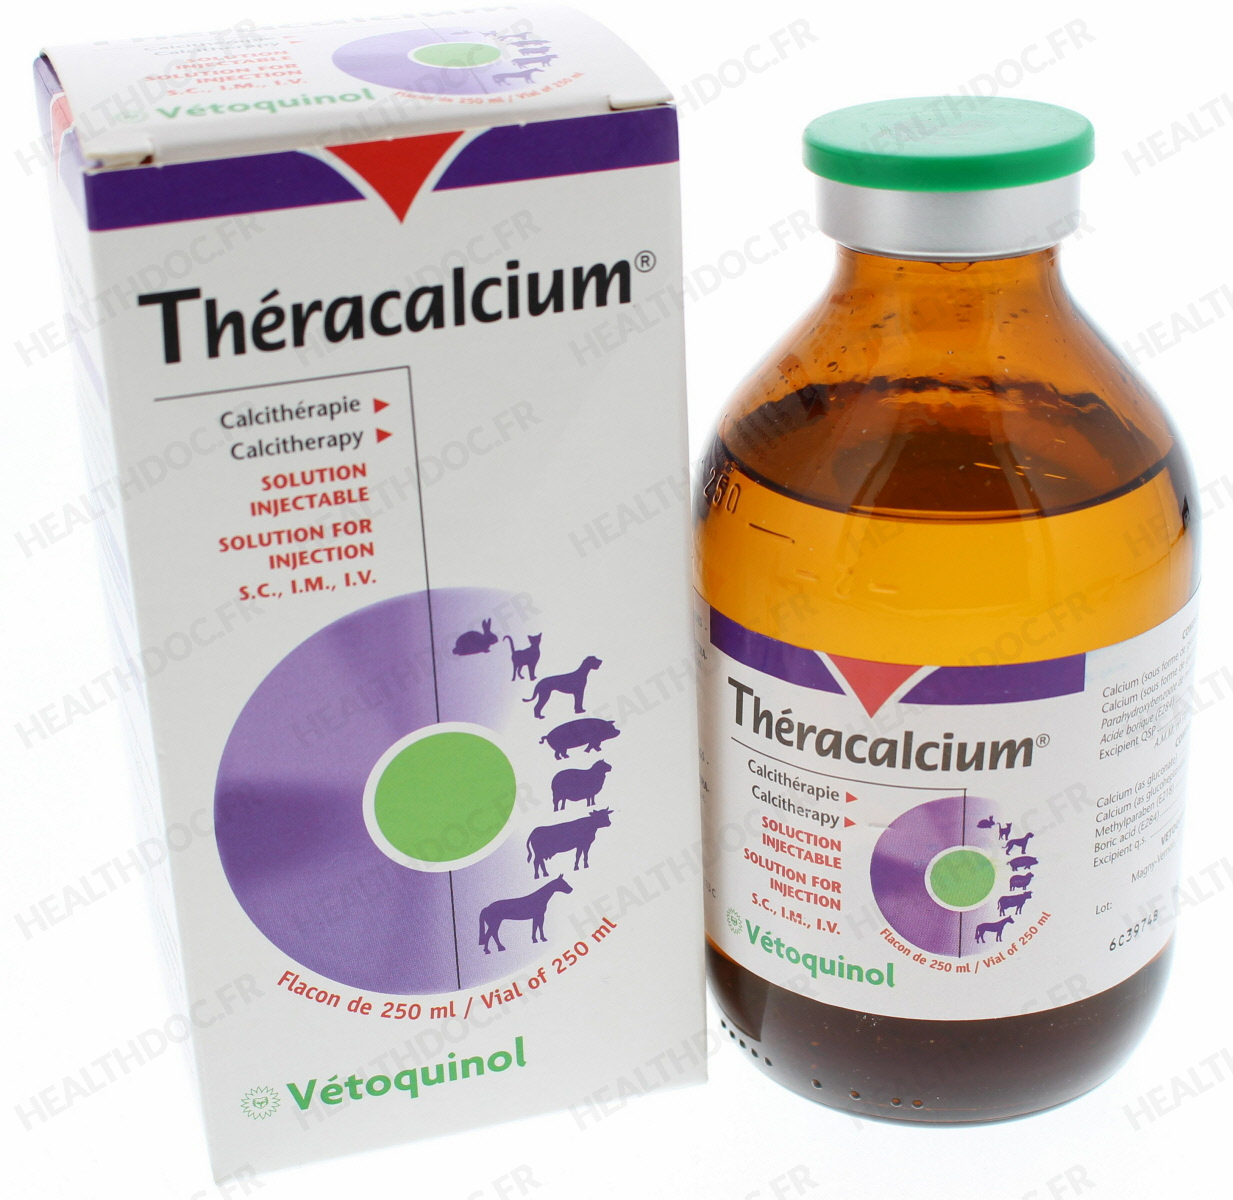 Buy THERACALCIUM 250 mL for Pigs, Rabbits, Dogs, Horses, Cats